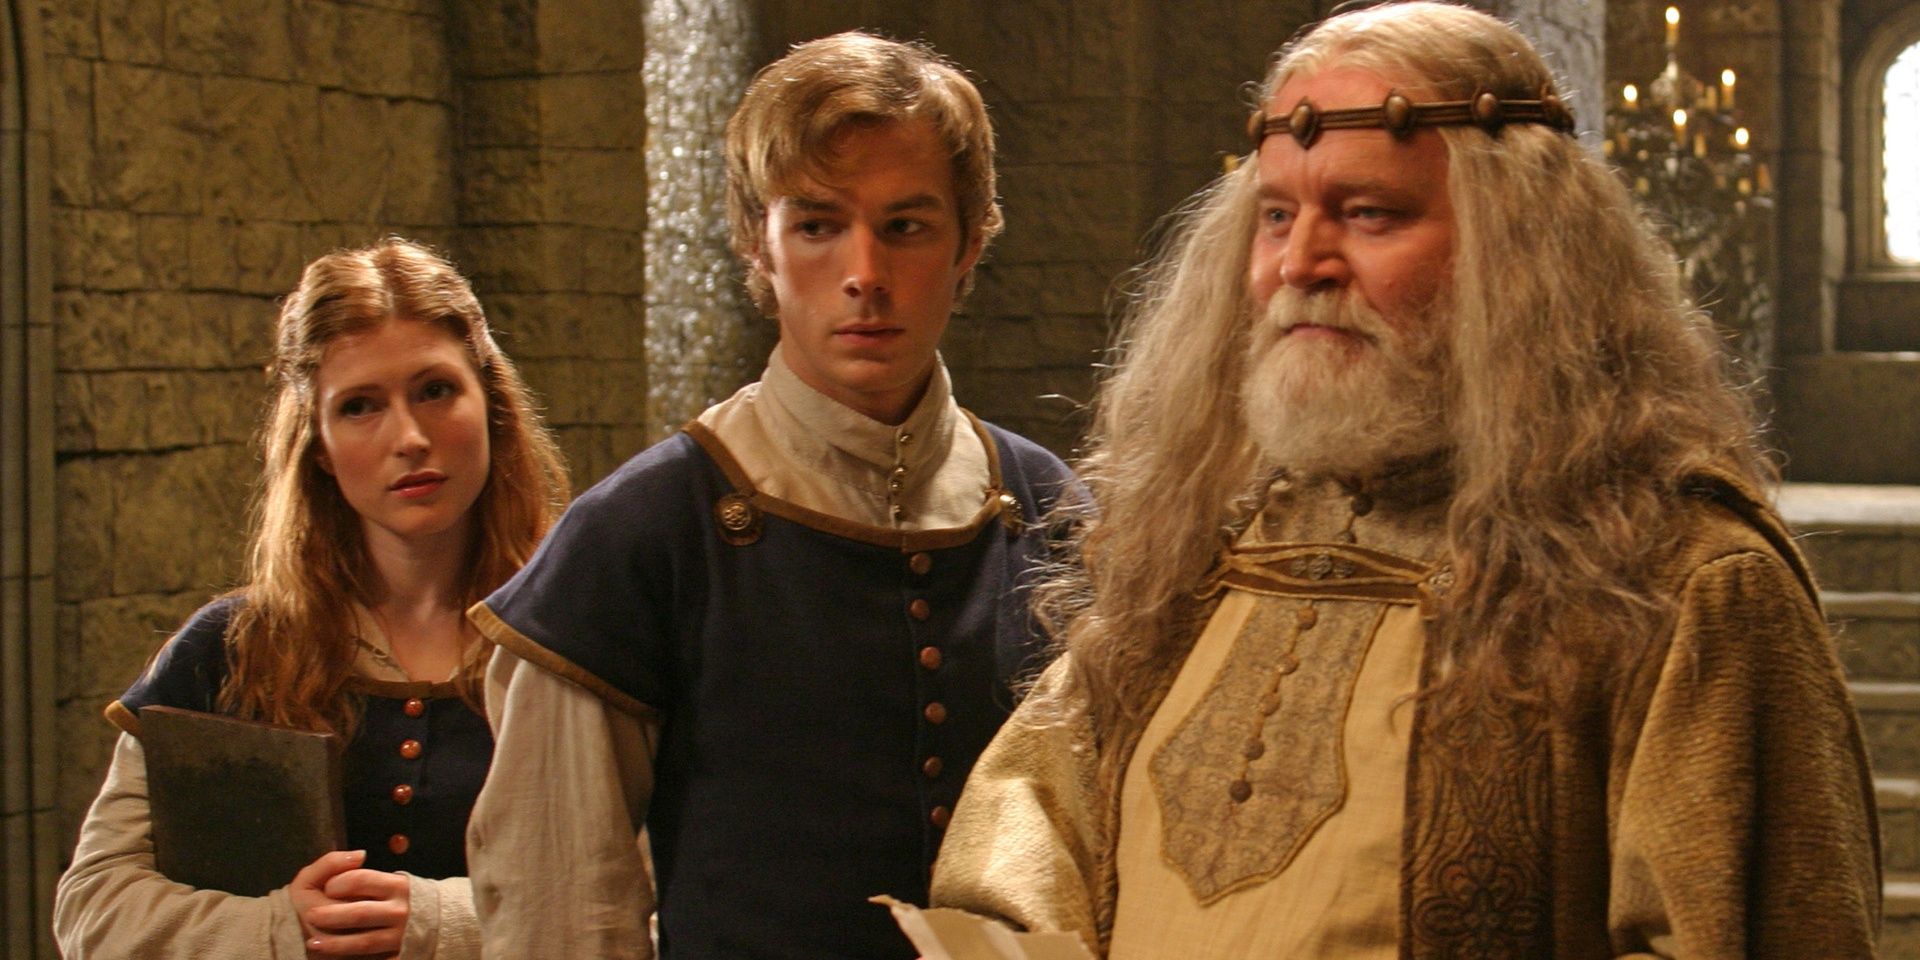 A still of 3 central characters from the 2004 miniseries Earthsea